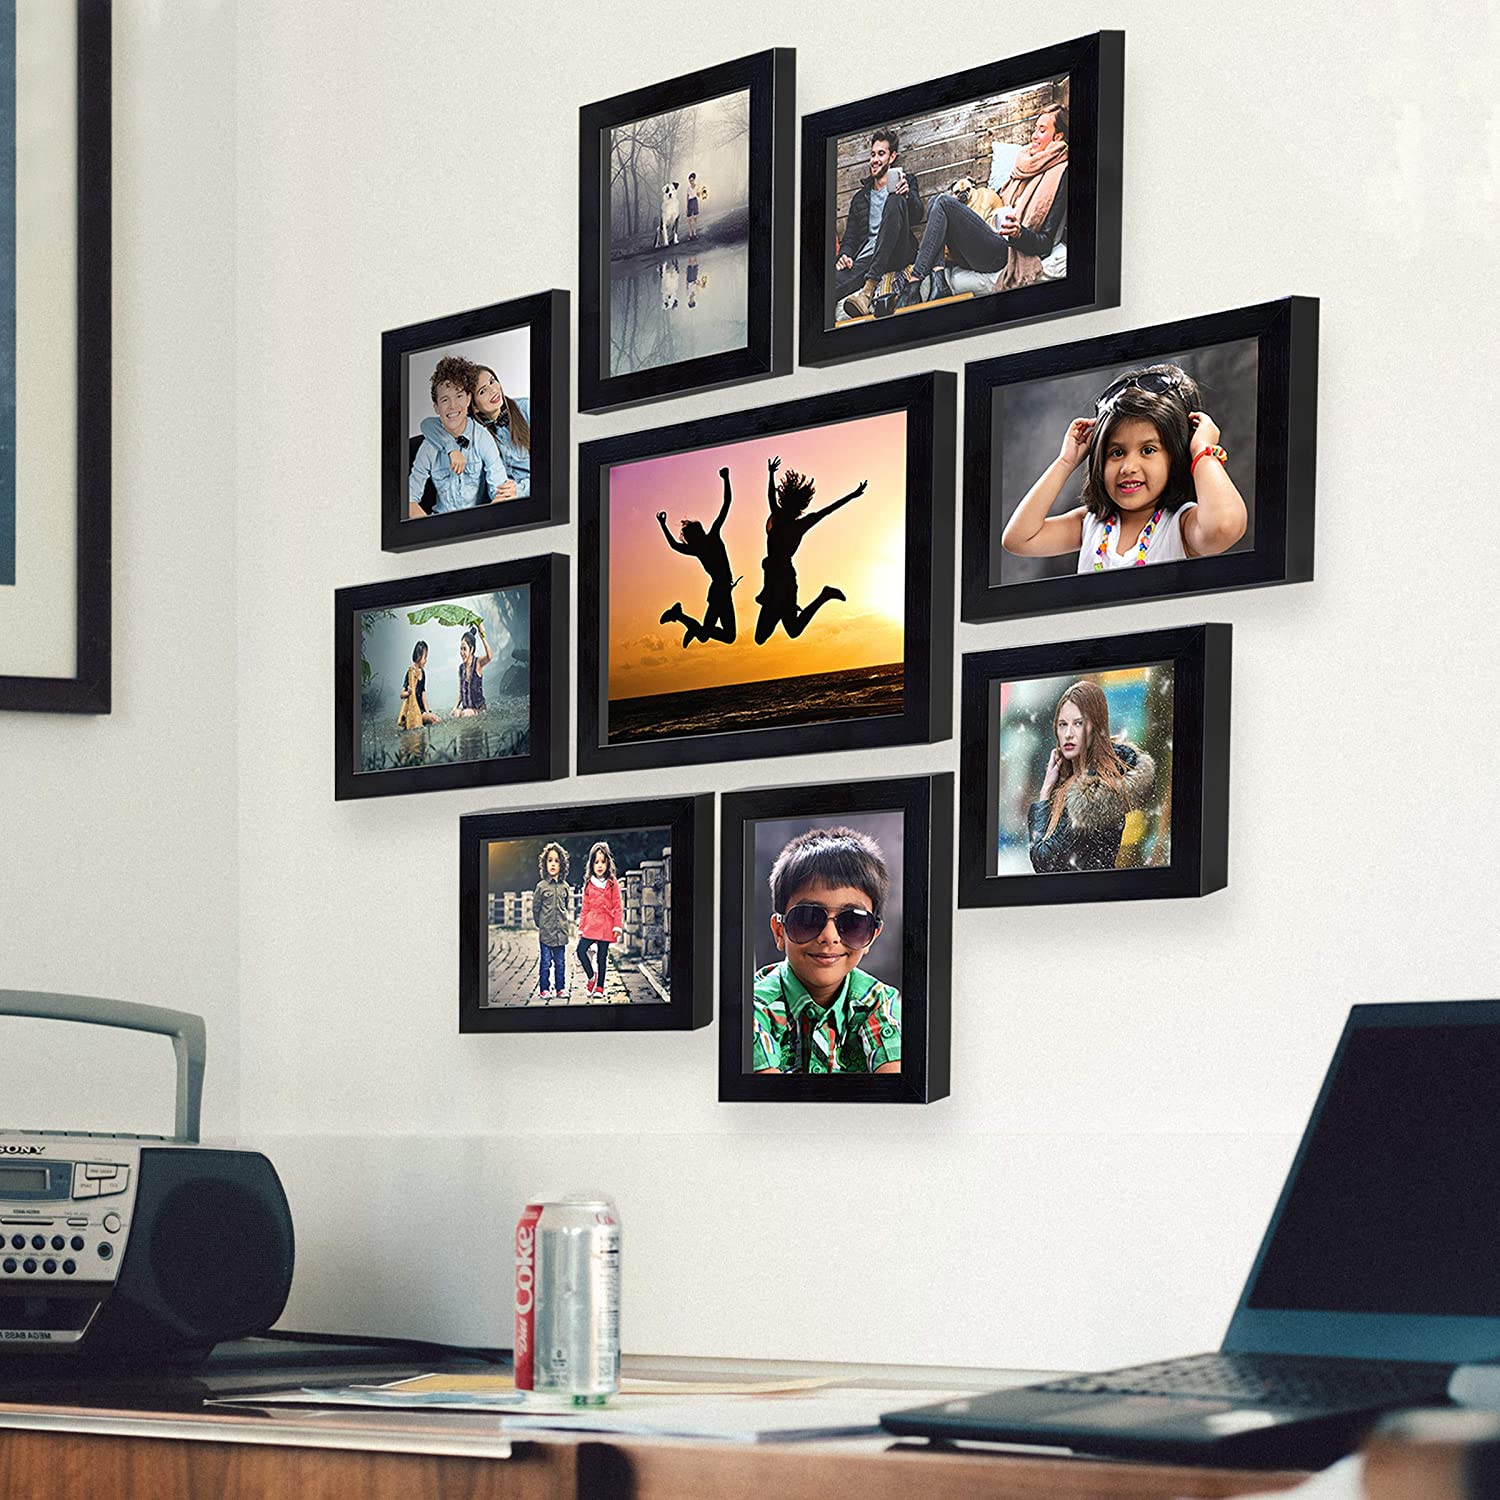 Amazon Festival Sale: Give a new look to the house for thousand rupees on Diwali, buy the most trending photo frames of home decoration from Amazon